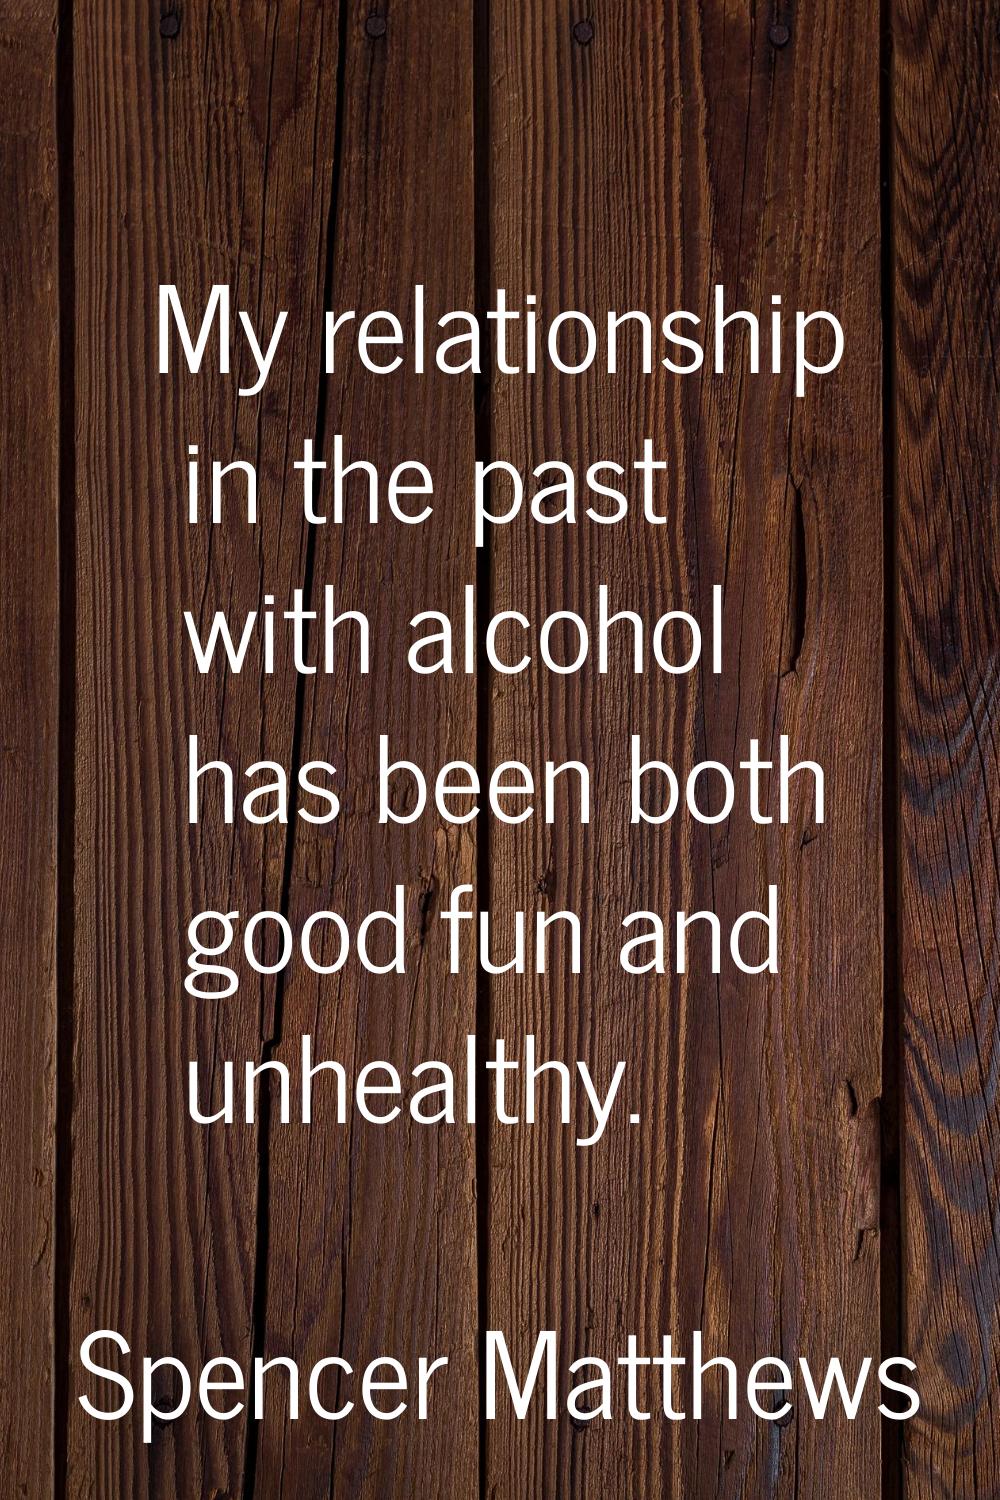 My relationship in the past with alcohol has been both good fun and unhealthy.